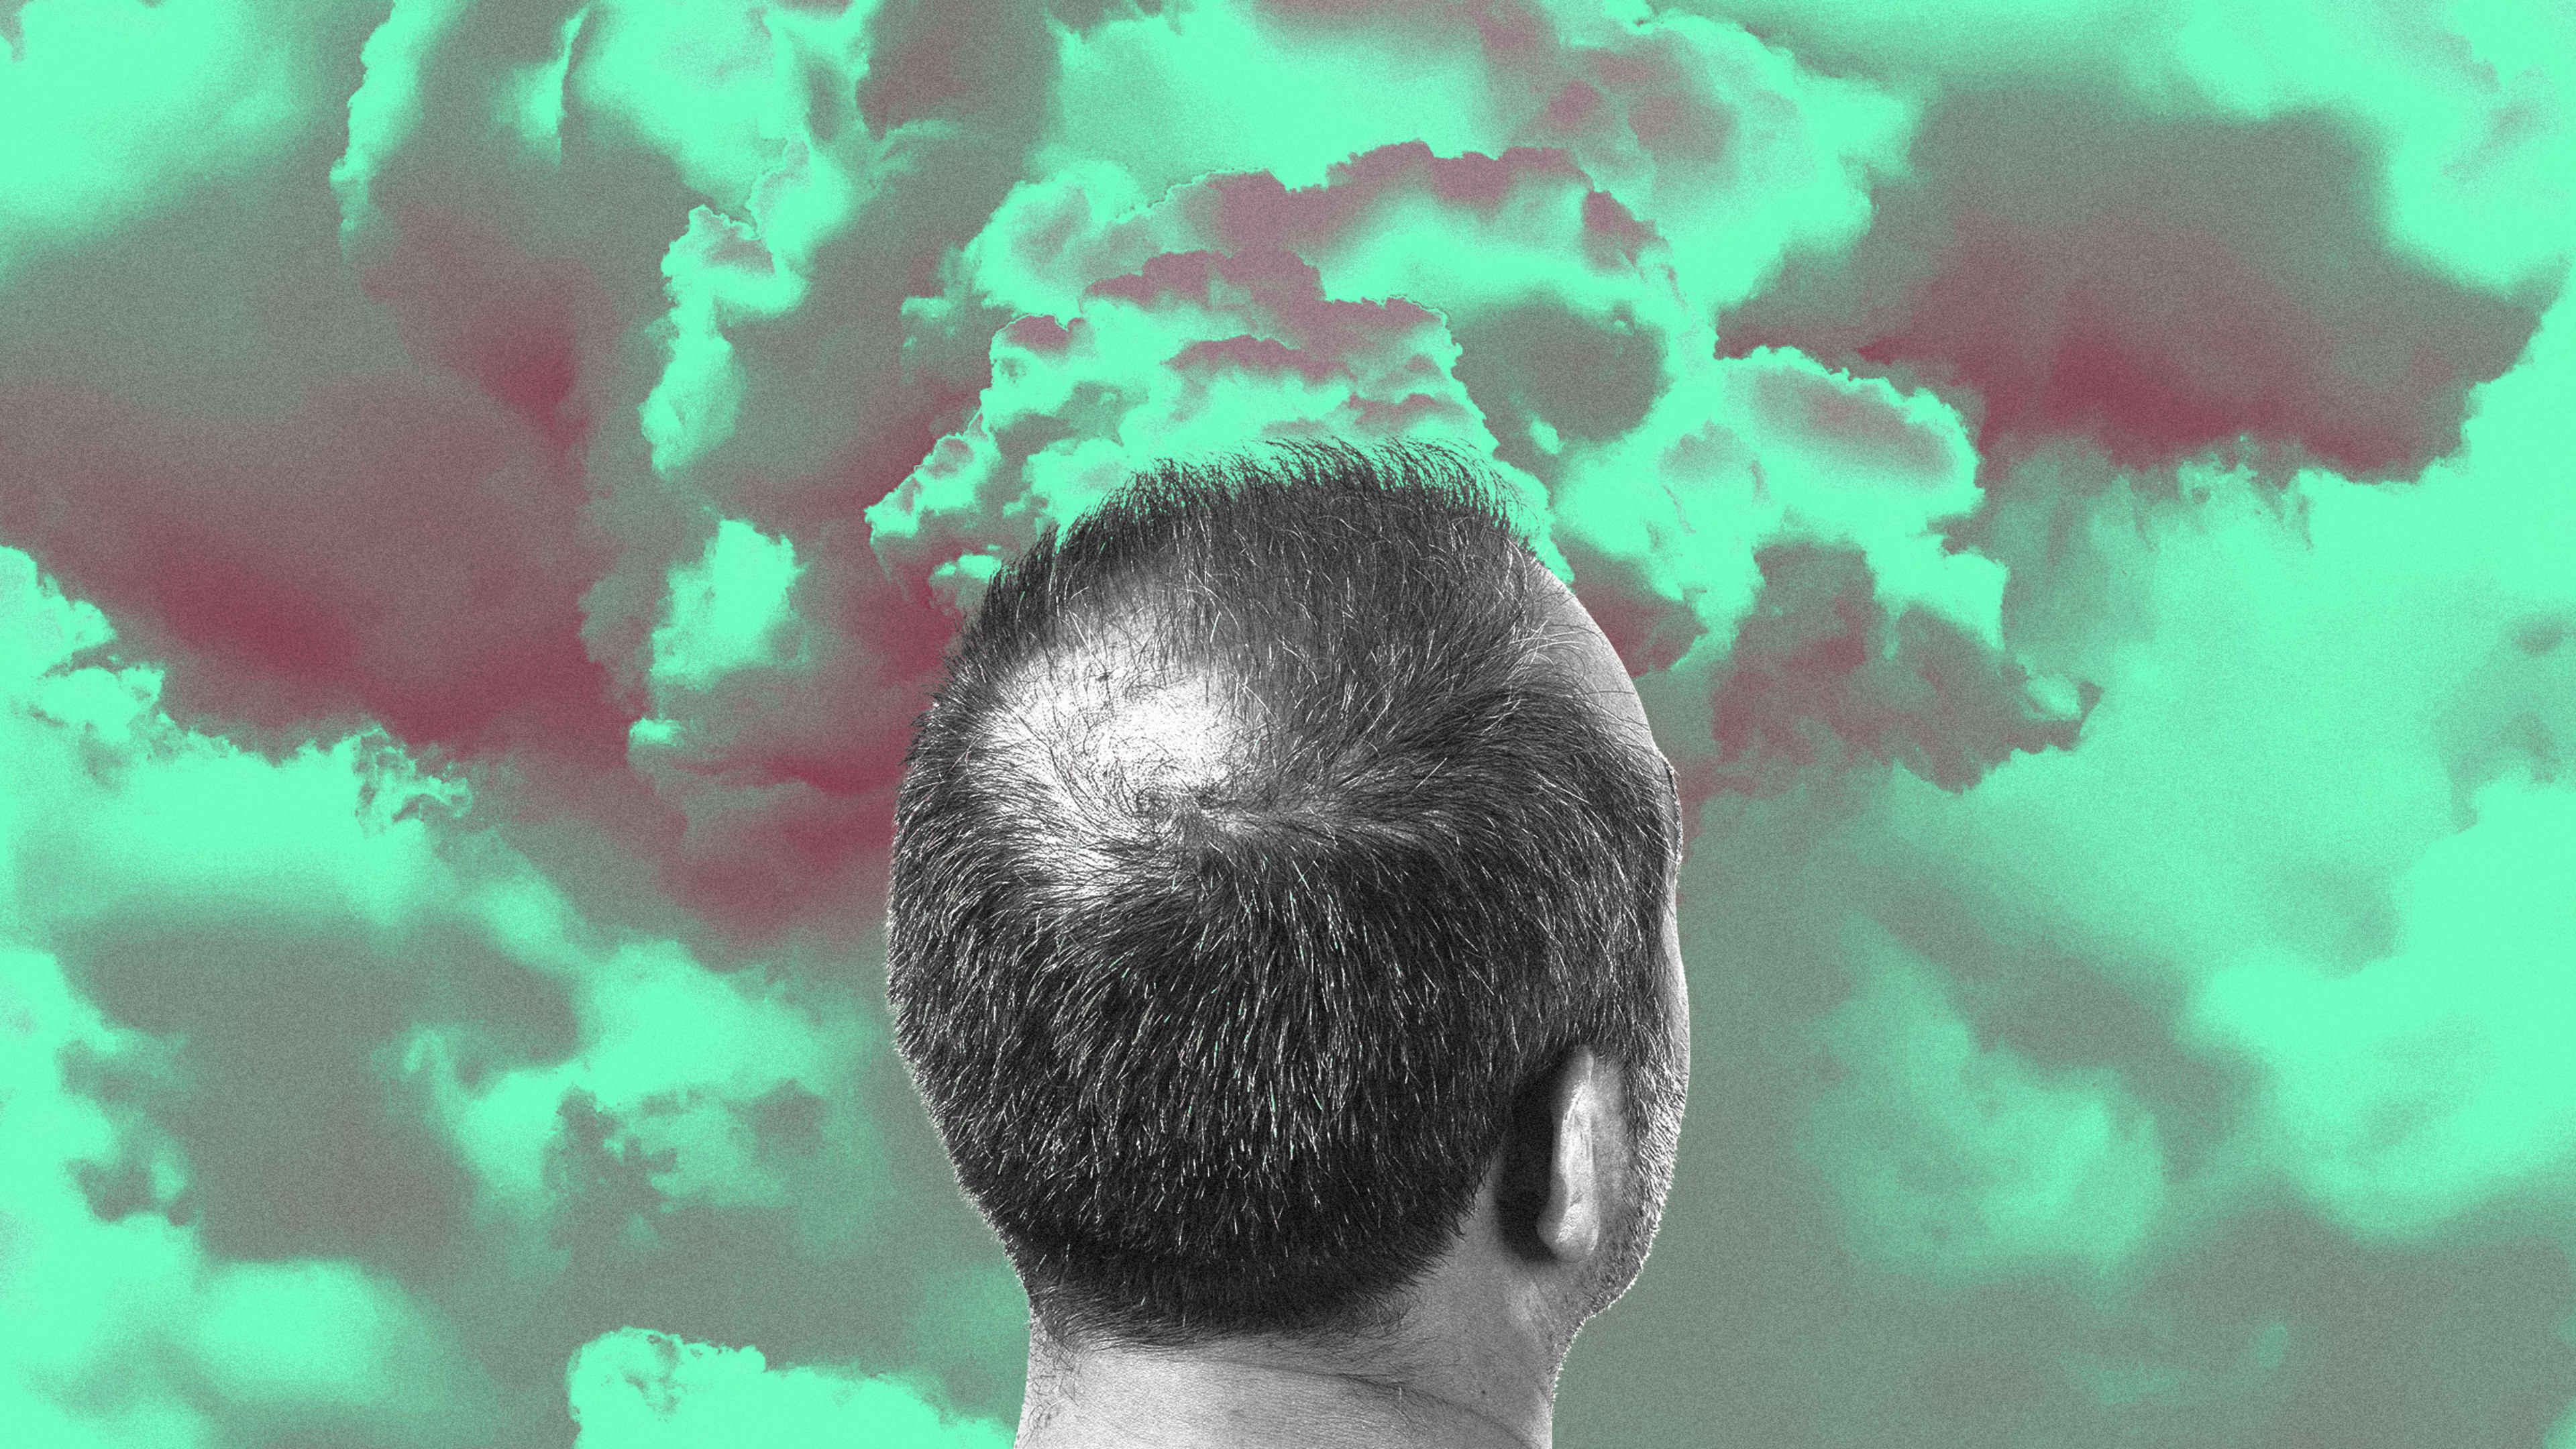 Air pollution might be why you’re going bald